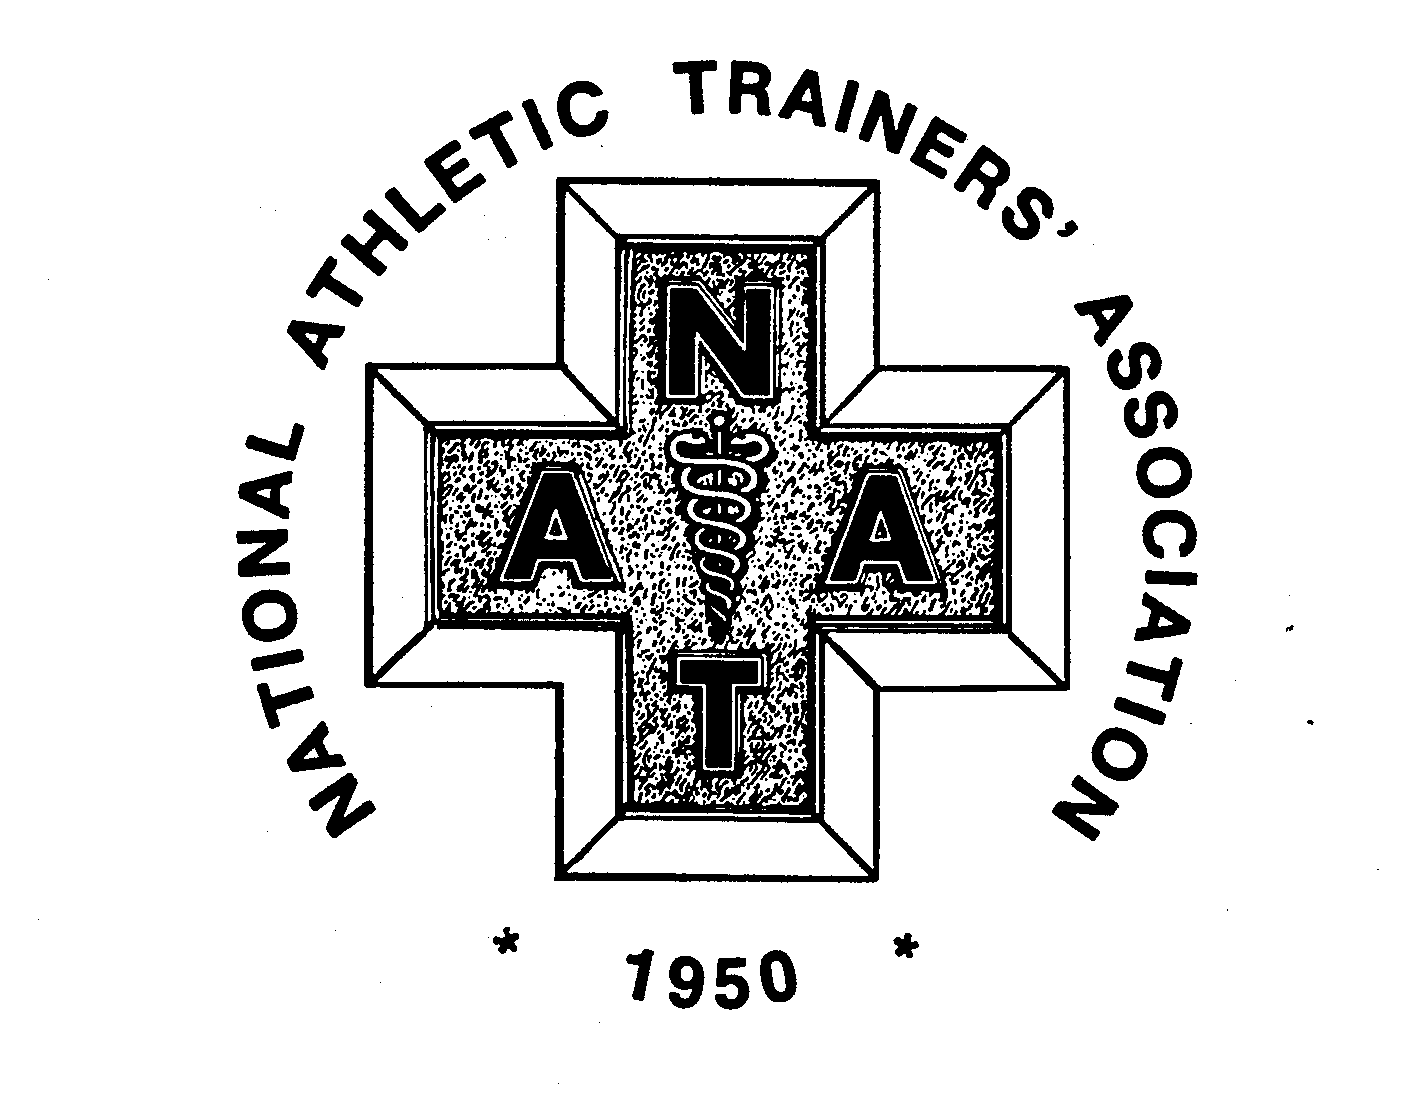  NATIONAL ATHLETIC TRAINERS' ASSOCIATION 1950 NATA